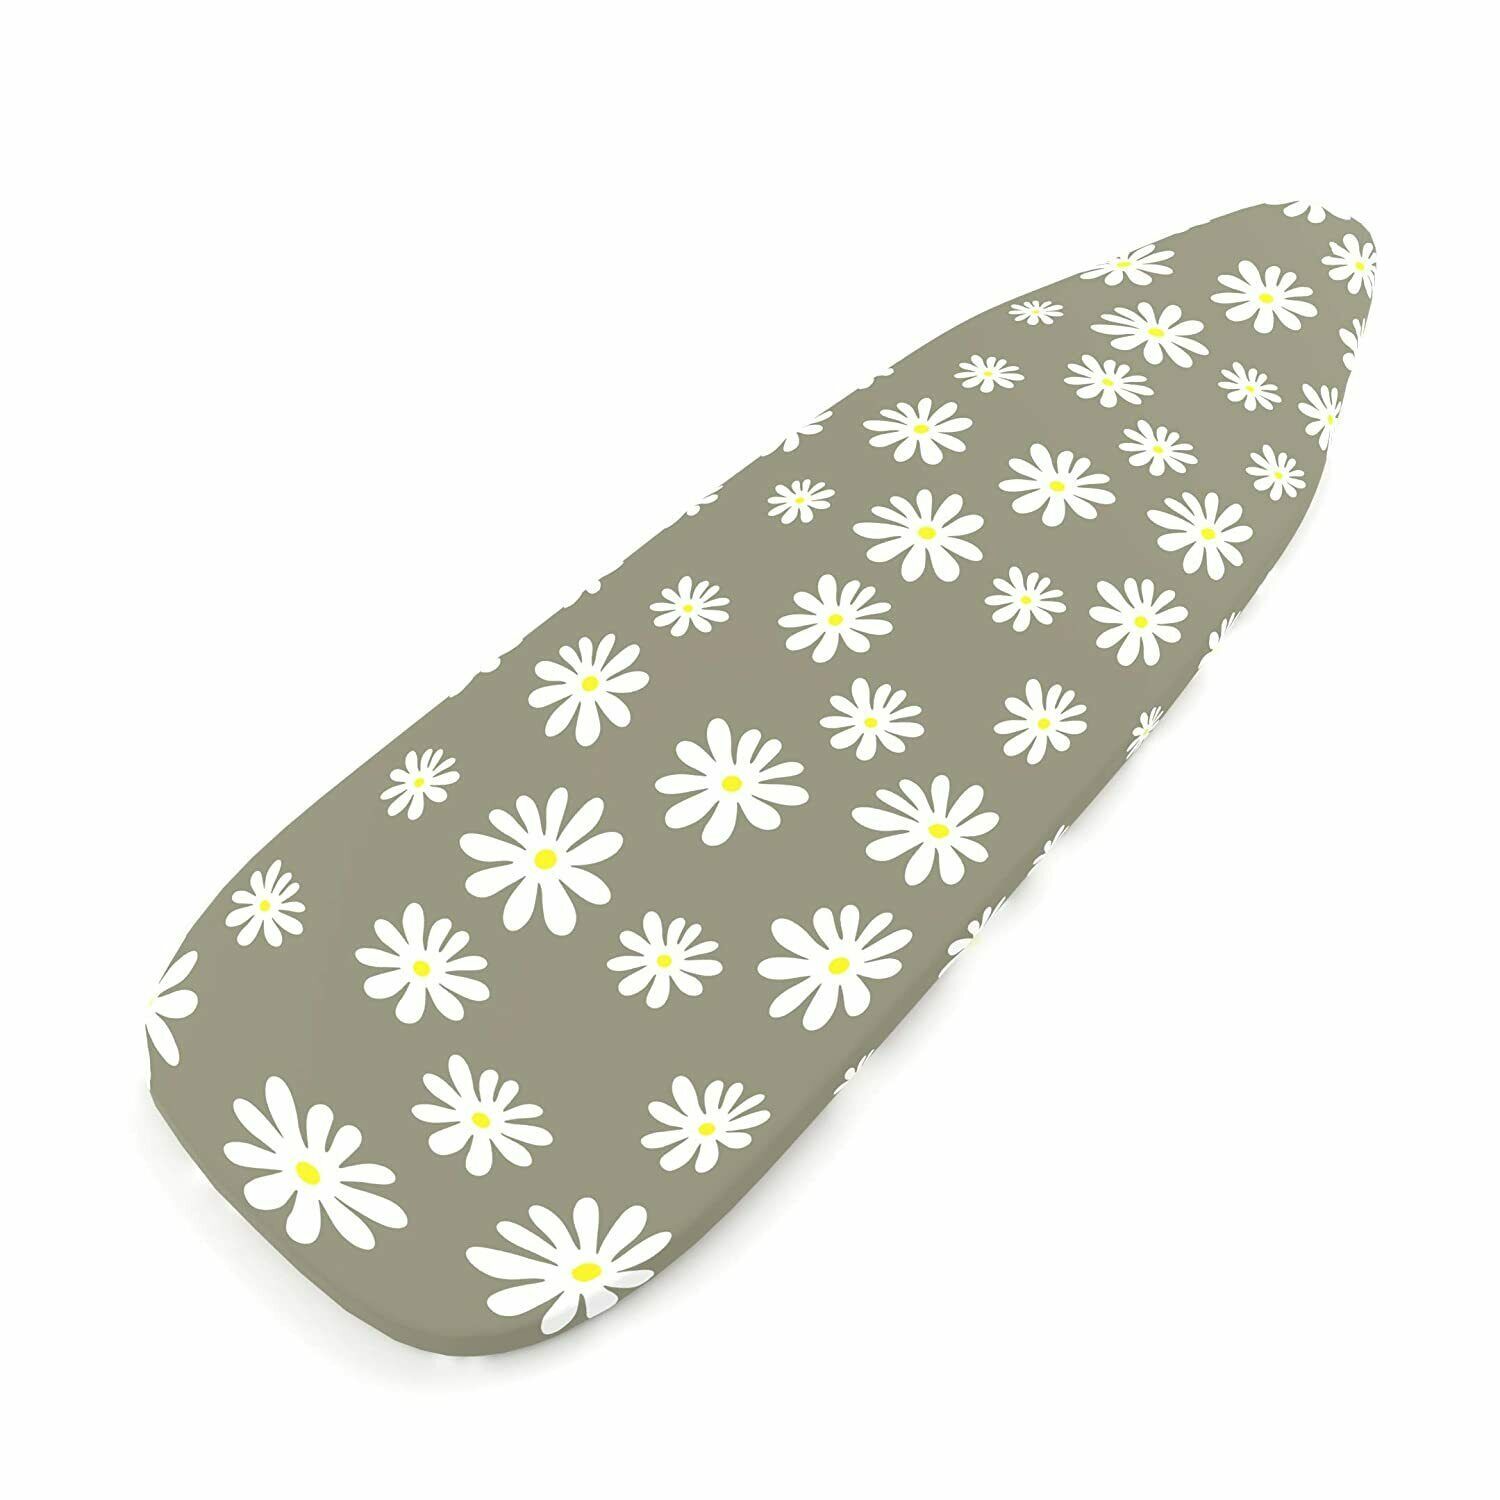 1/2" Ironing Board Cover & Pad 15W” x 54L” BBB Homz Reversible  Extra-Thick 